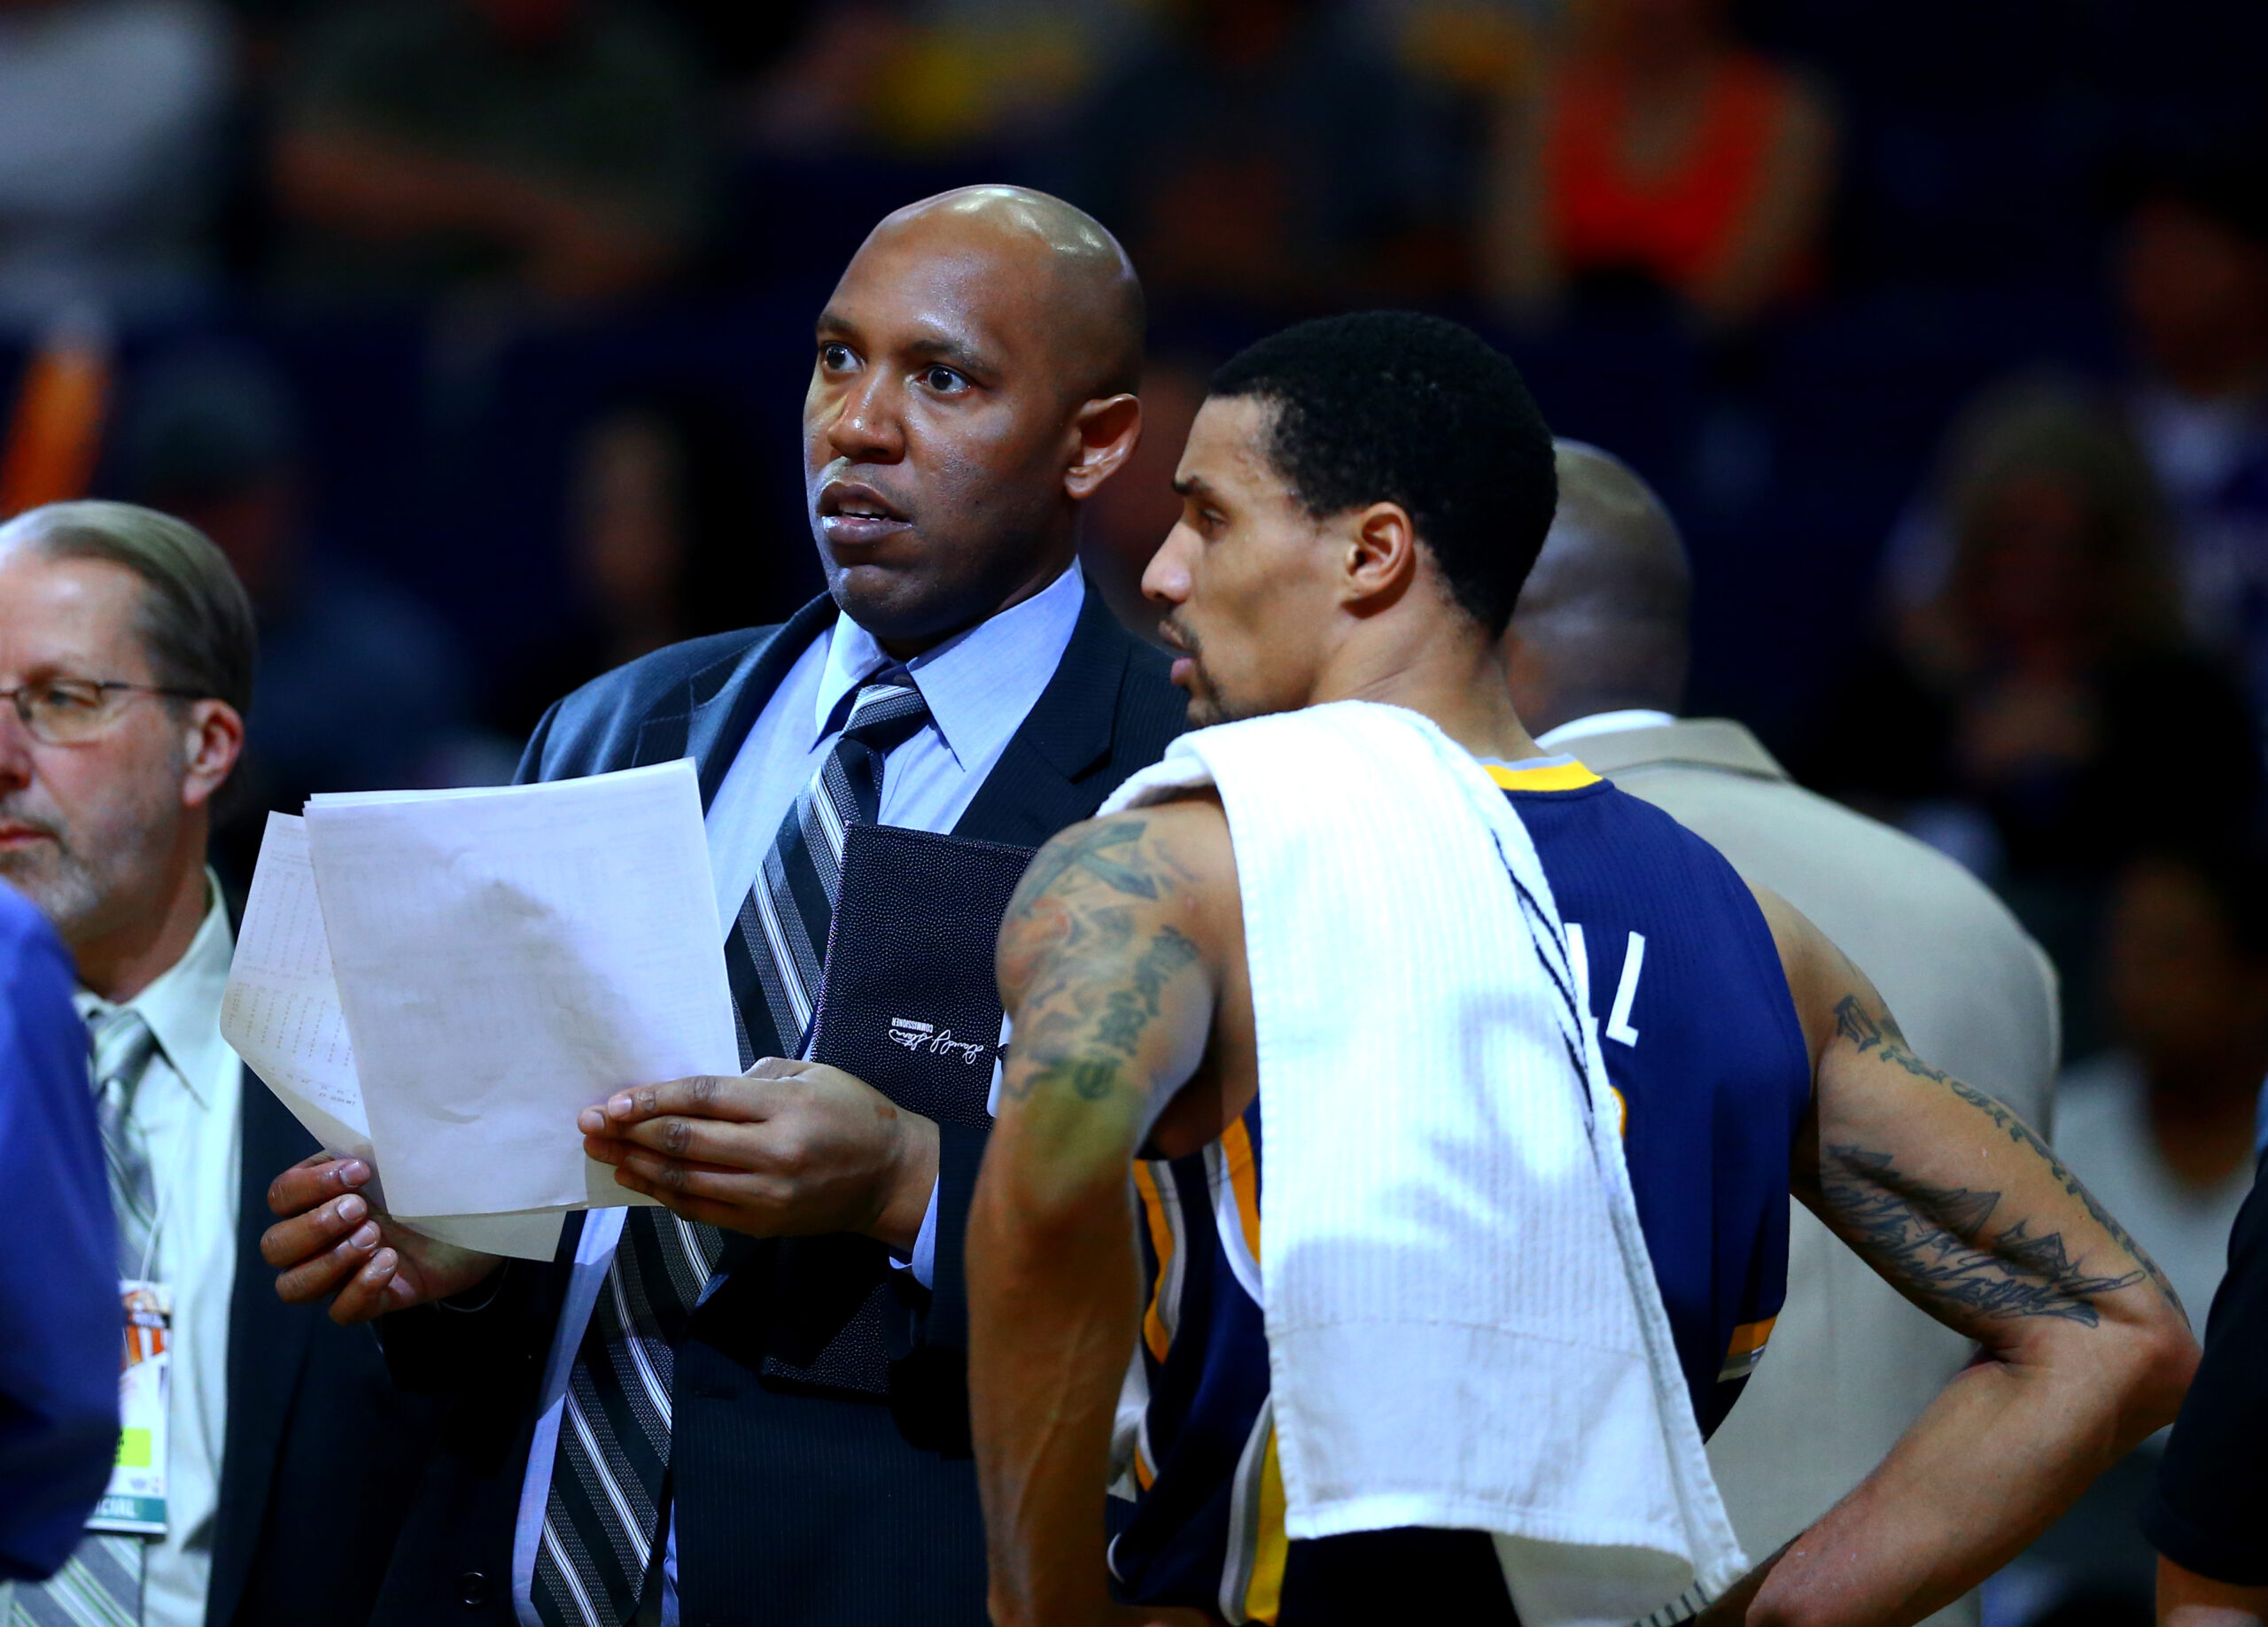 Denver Nuggets assistant coach Popeye Jones, filling in for coach